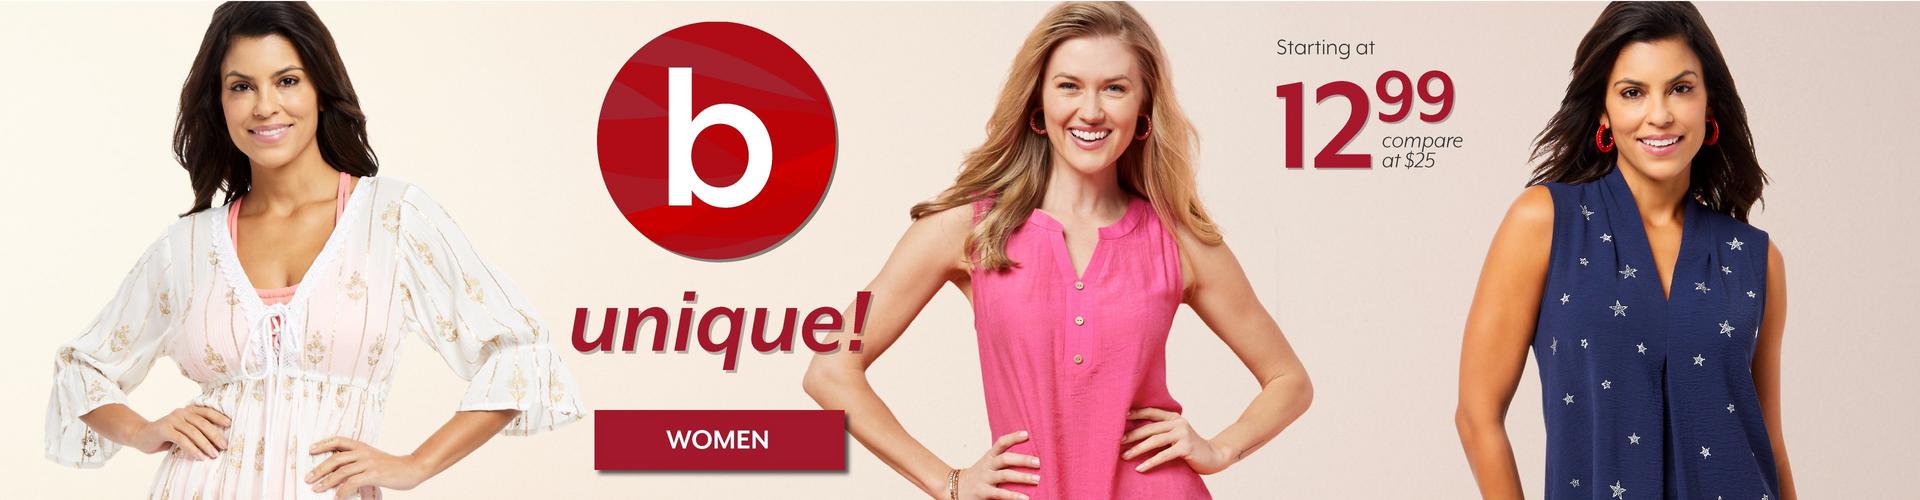 be Unique, starting at 12.99 apparel for women